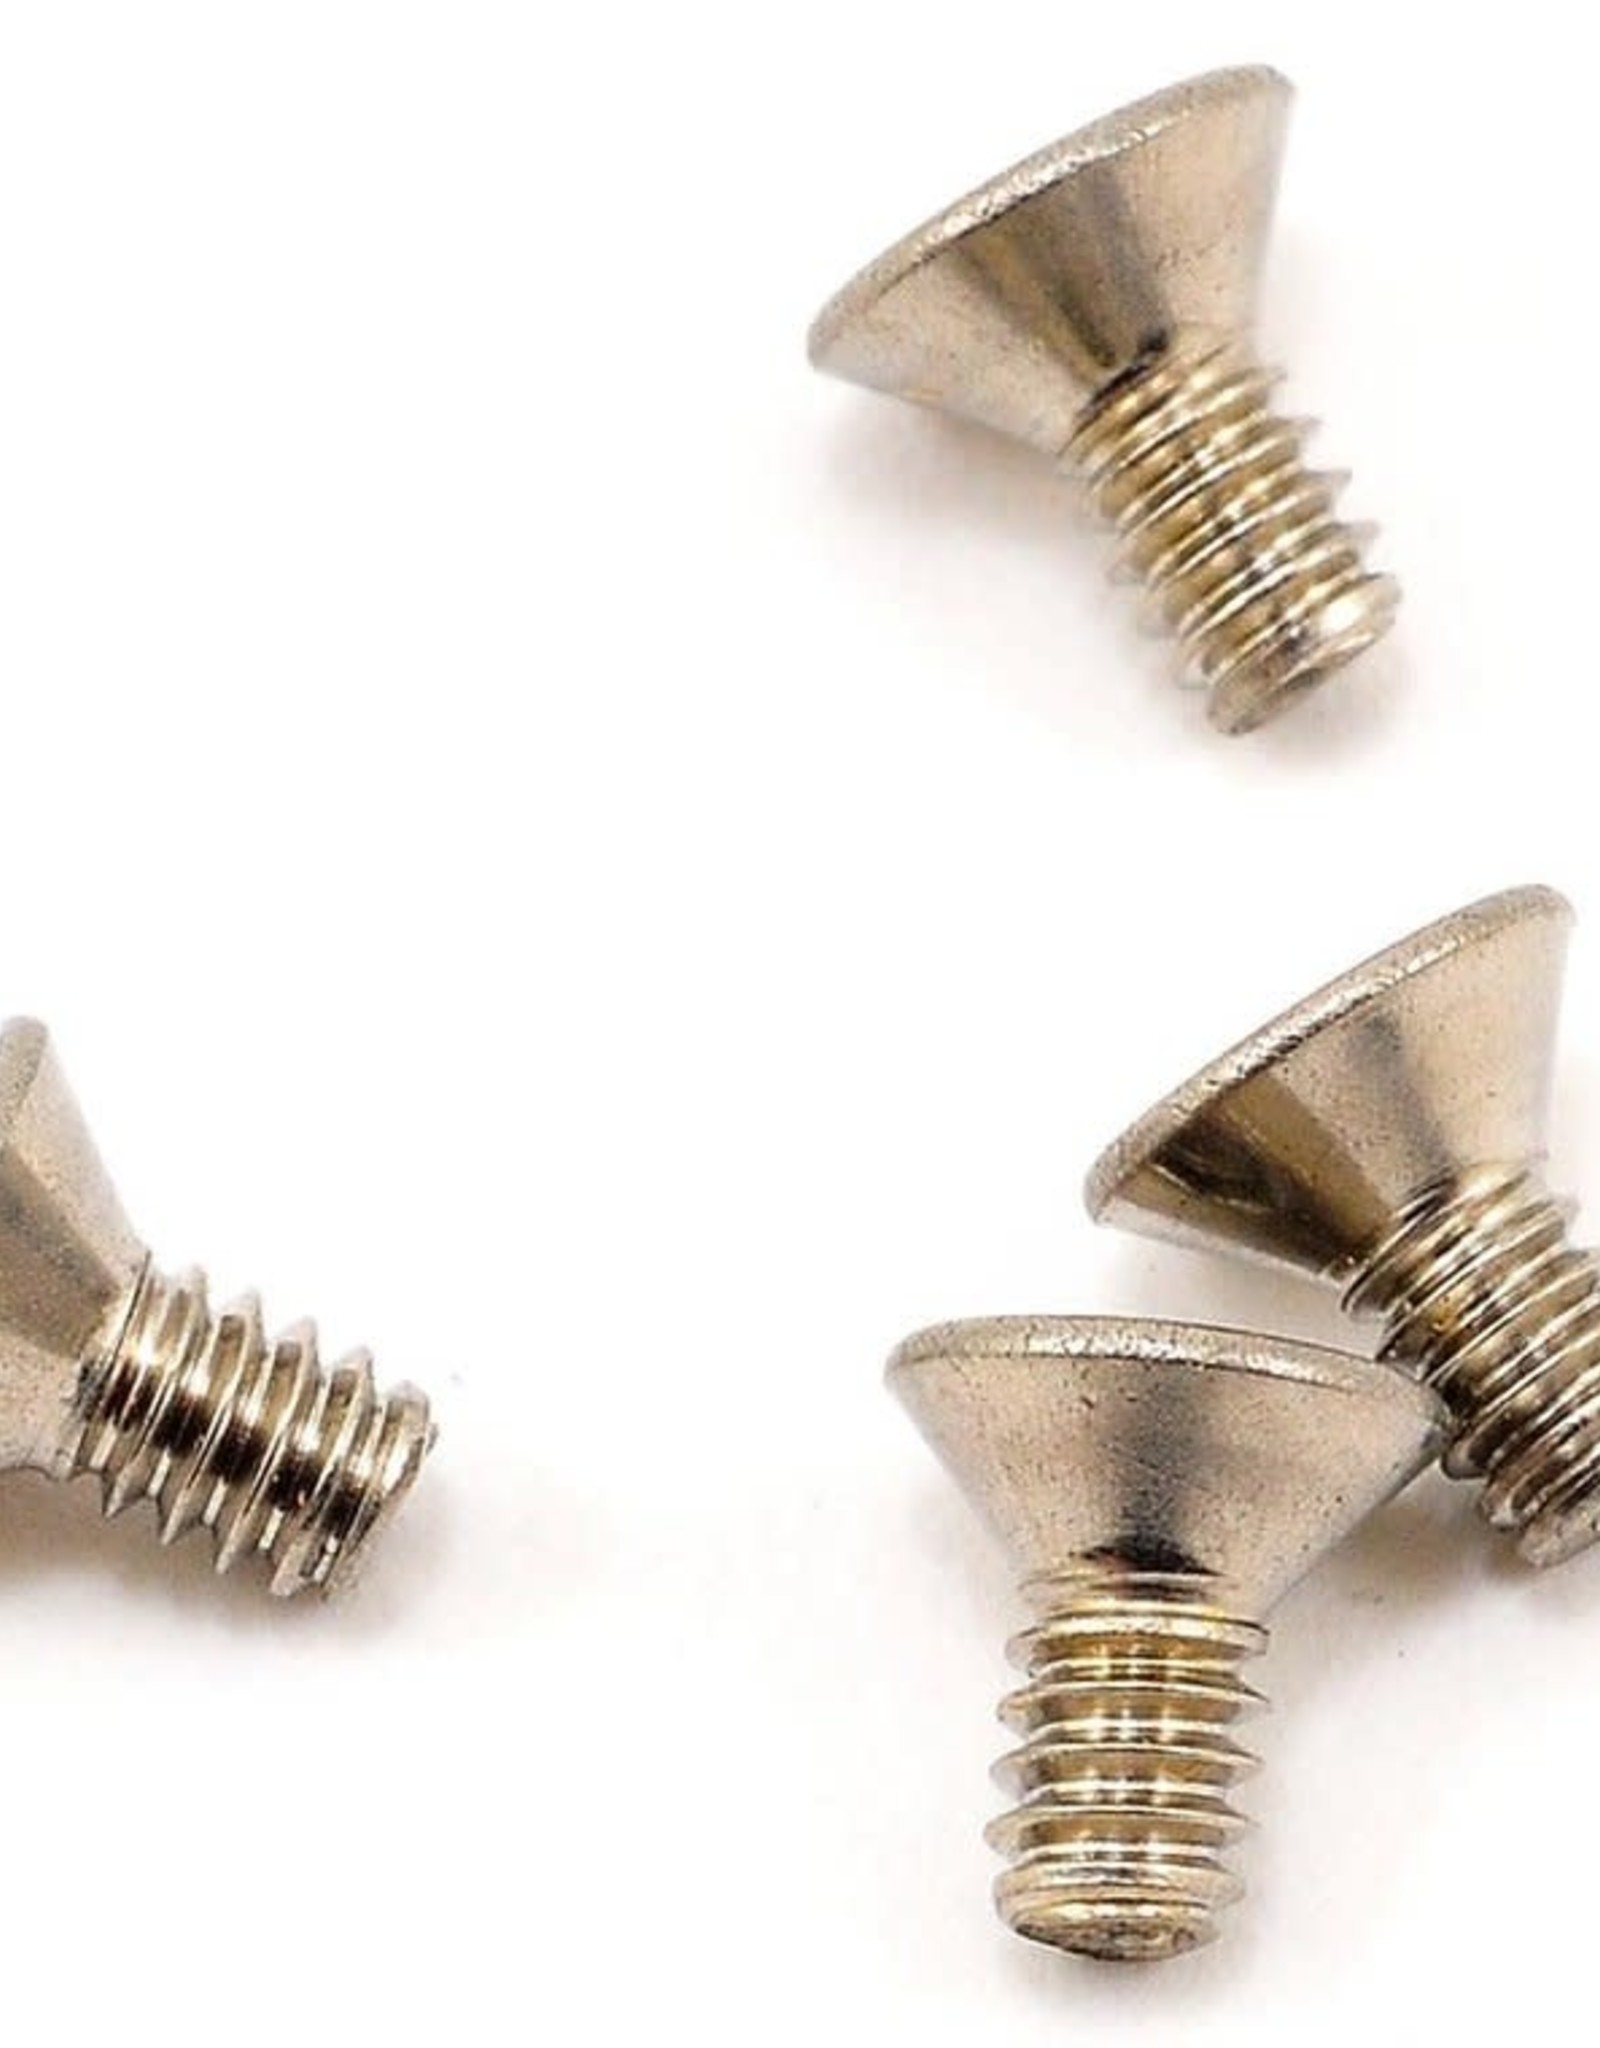 CRC CRC 1/4x4-40 Stainless Steel Flat Head Screw (4)